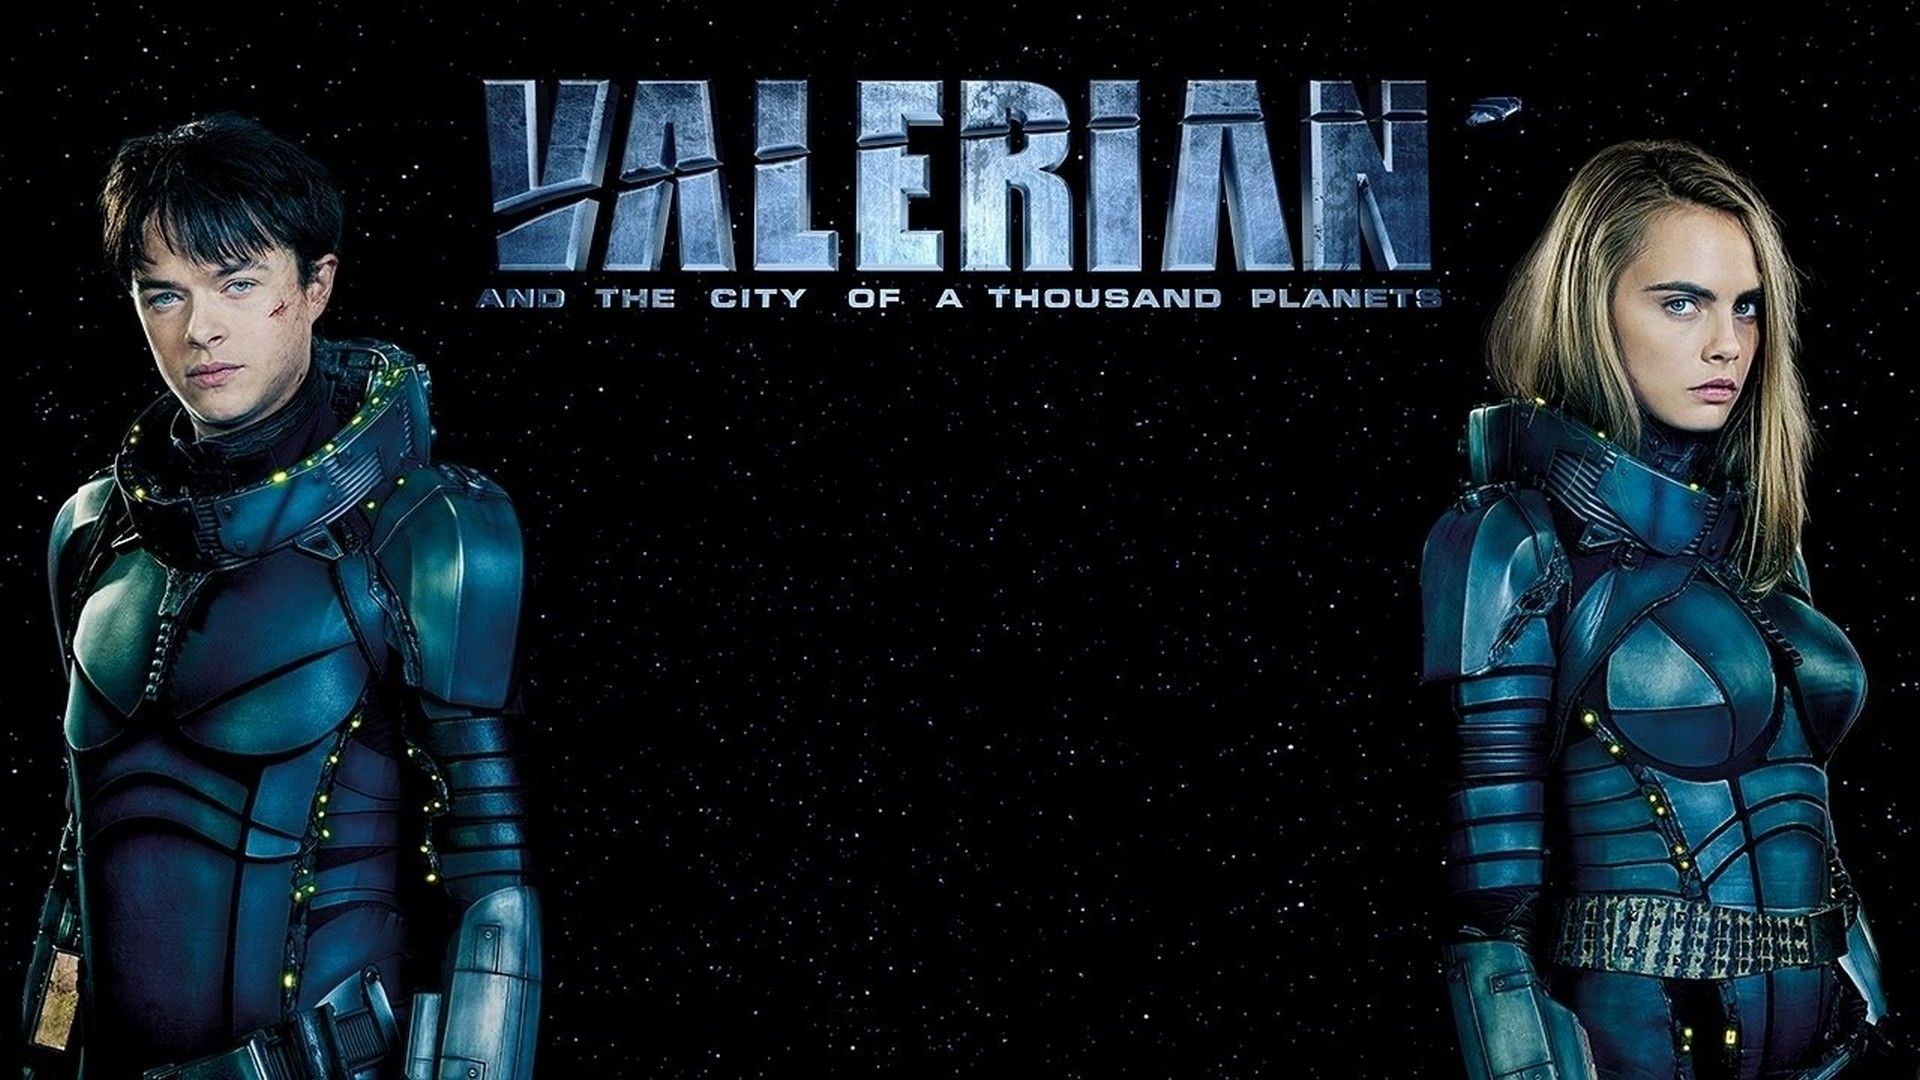 Free download Valerian and the City of a Thousand Planets wallpaper Valerian [1920x1080] for your Desktop, Mobile & Tablet. Explore Valerian And The City Of A Thousand Planets Wallpaper